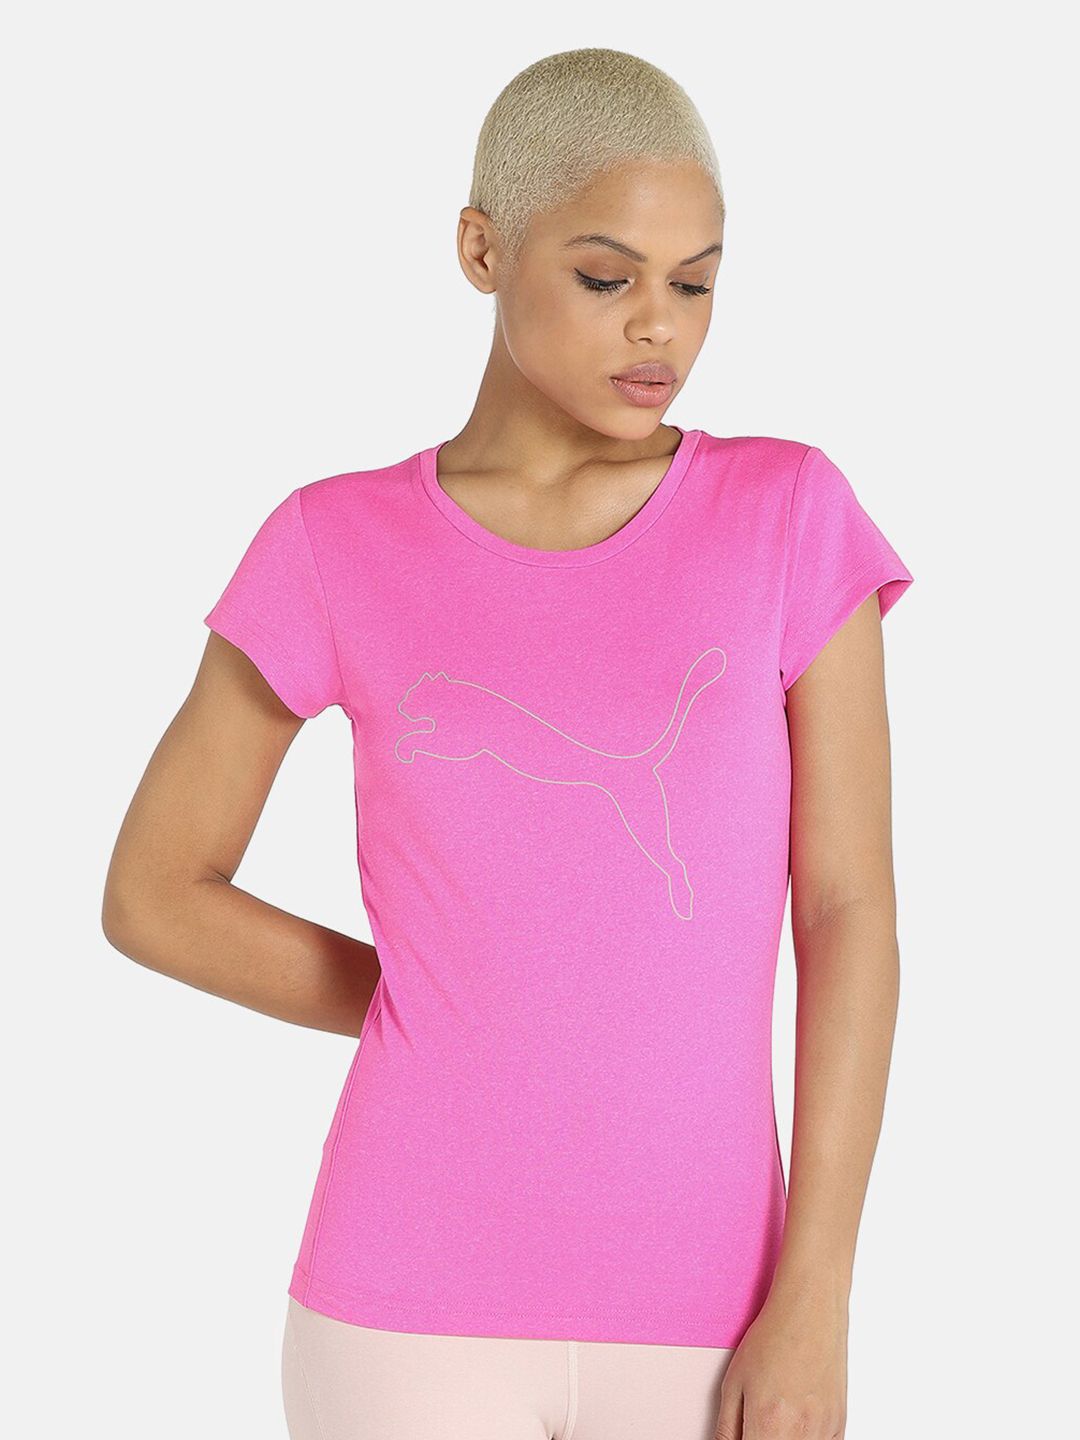 Puma Women Pink Brand Logo Printed Slim Fit Active Heather T-shirt Price in India